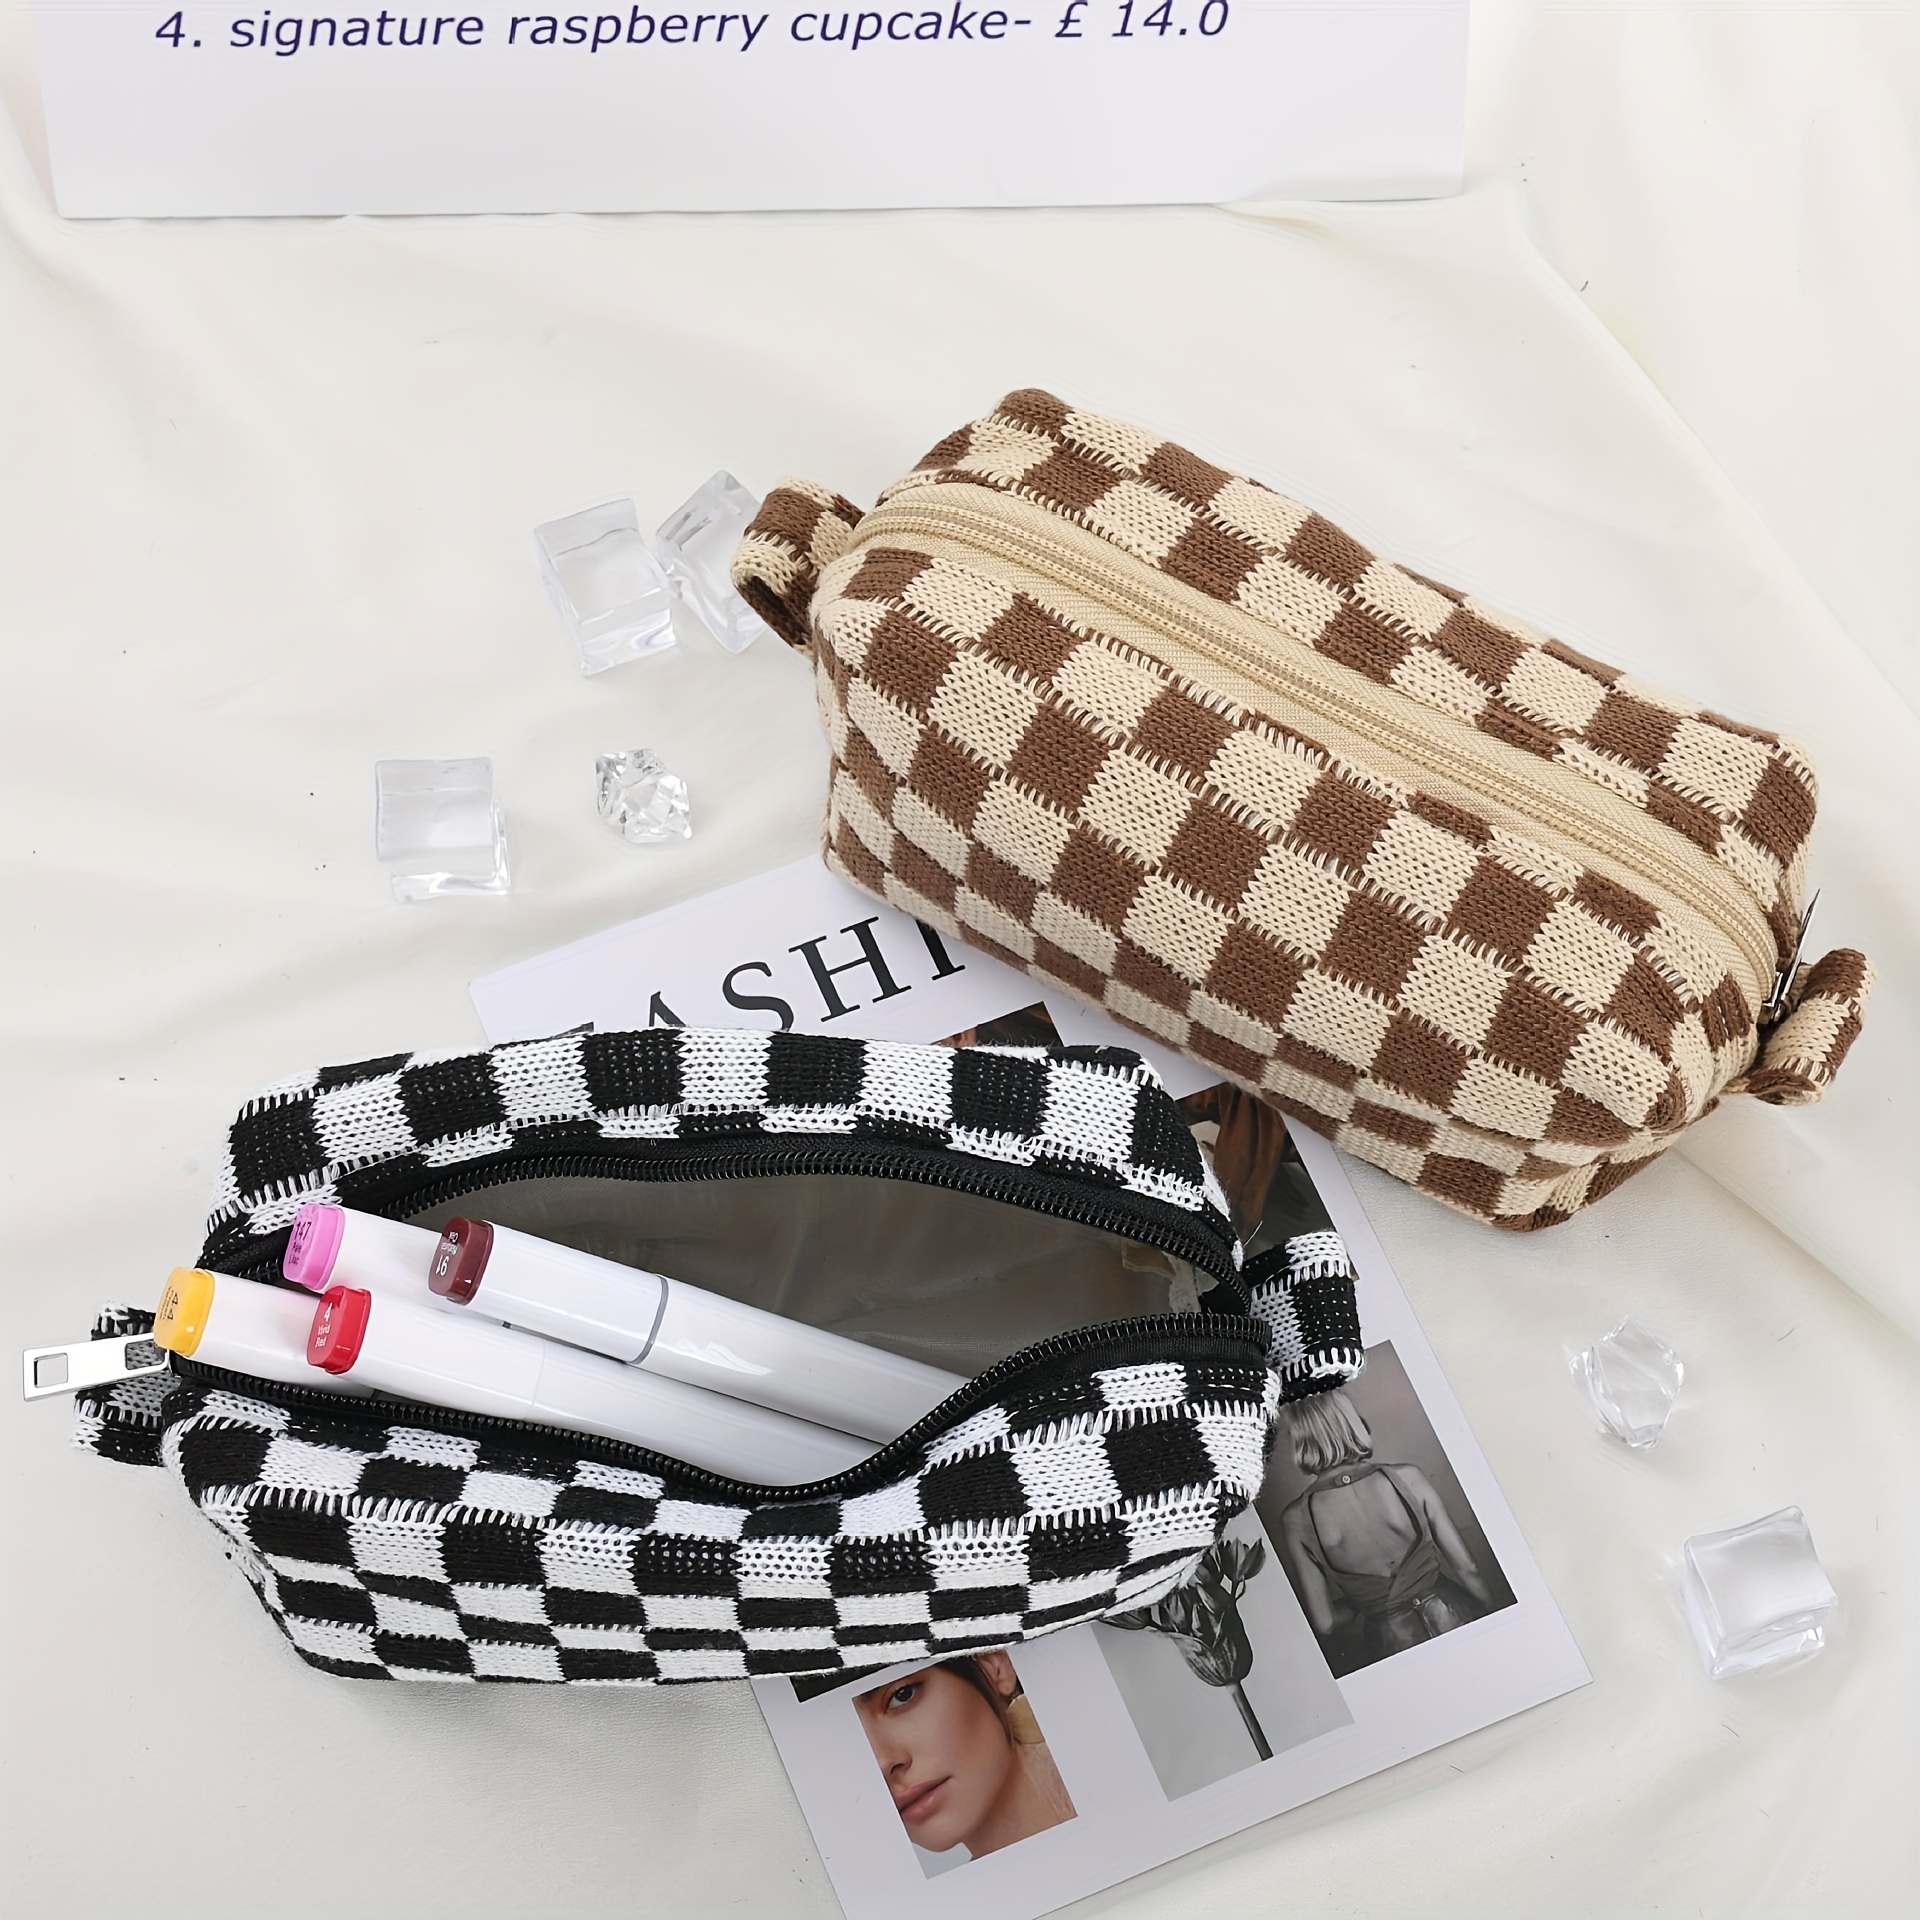 Makeup Bag Checkered Cosmetic and brush Bag Brown ,Travel Toiletry